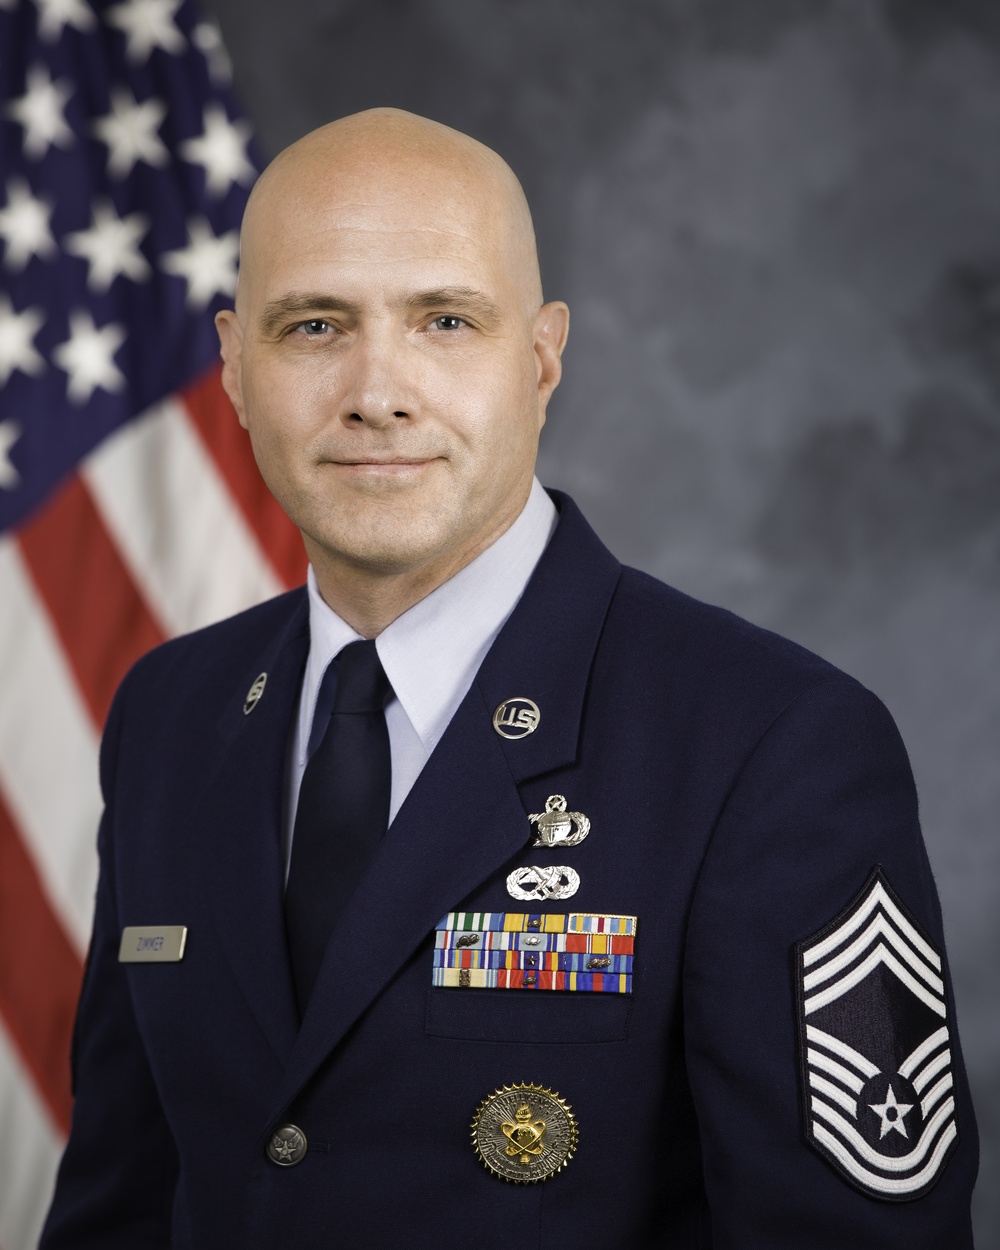 Official portrait, Chief Master Sgt. Michael B. Zimmer, US Air Force